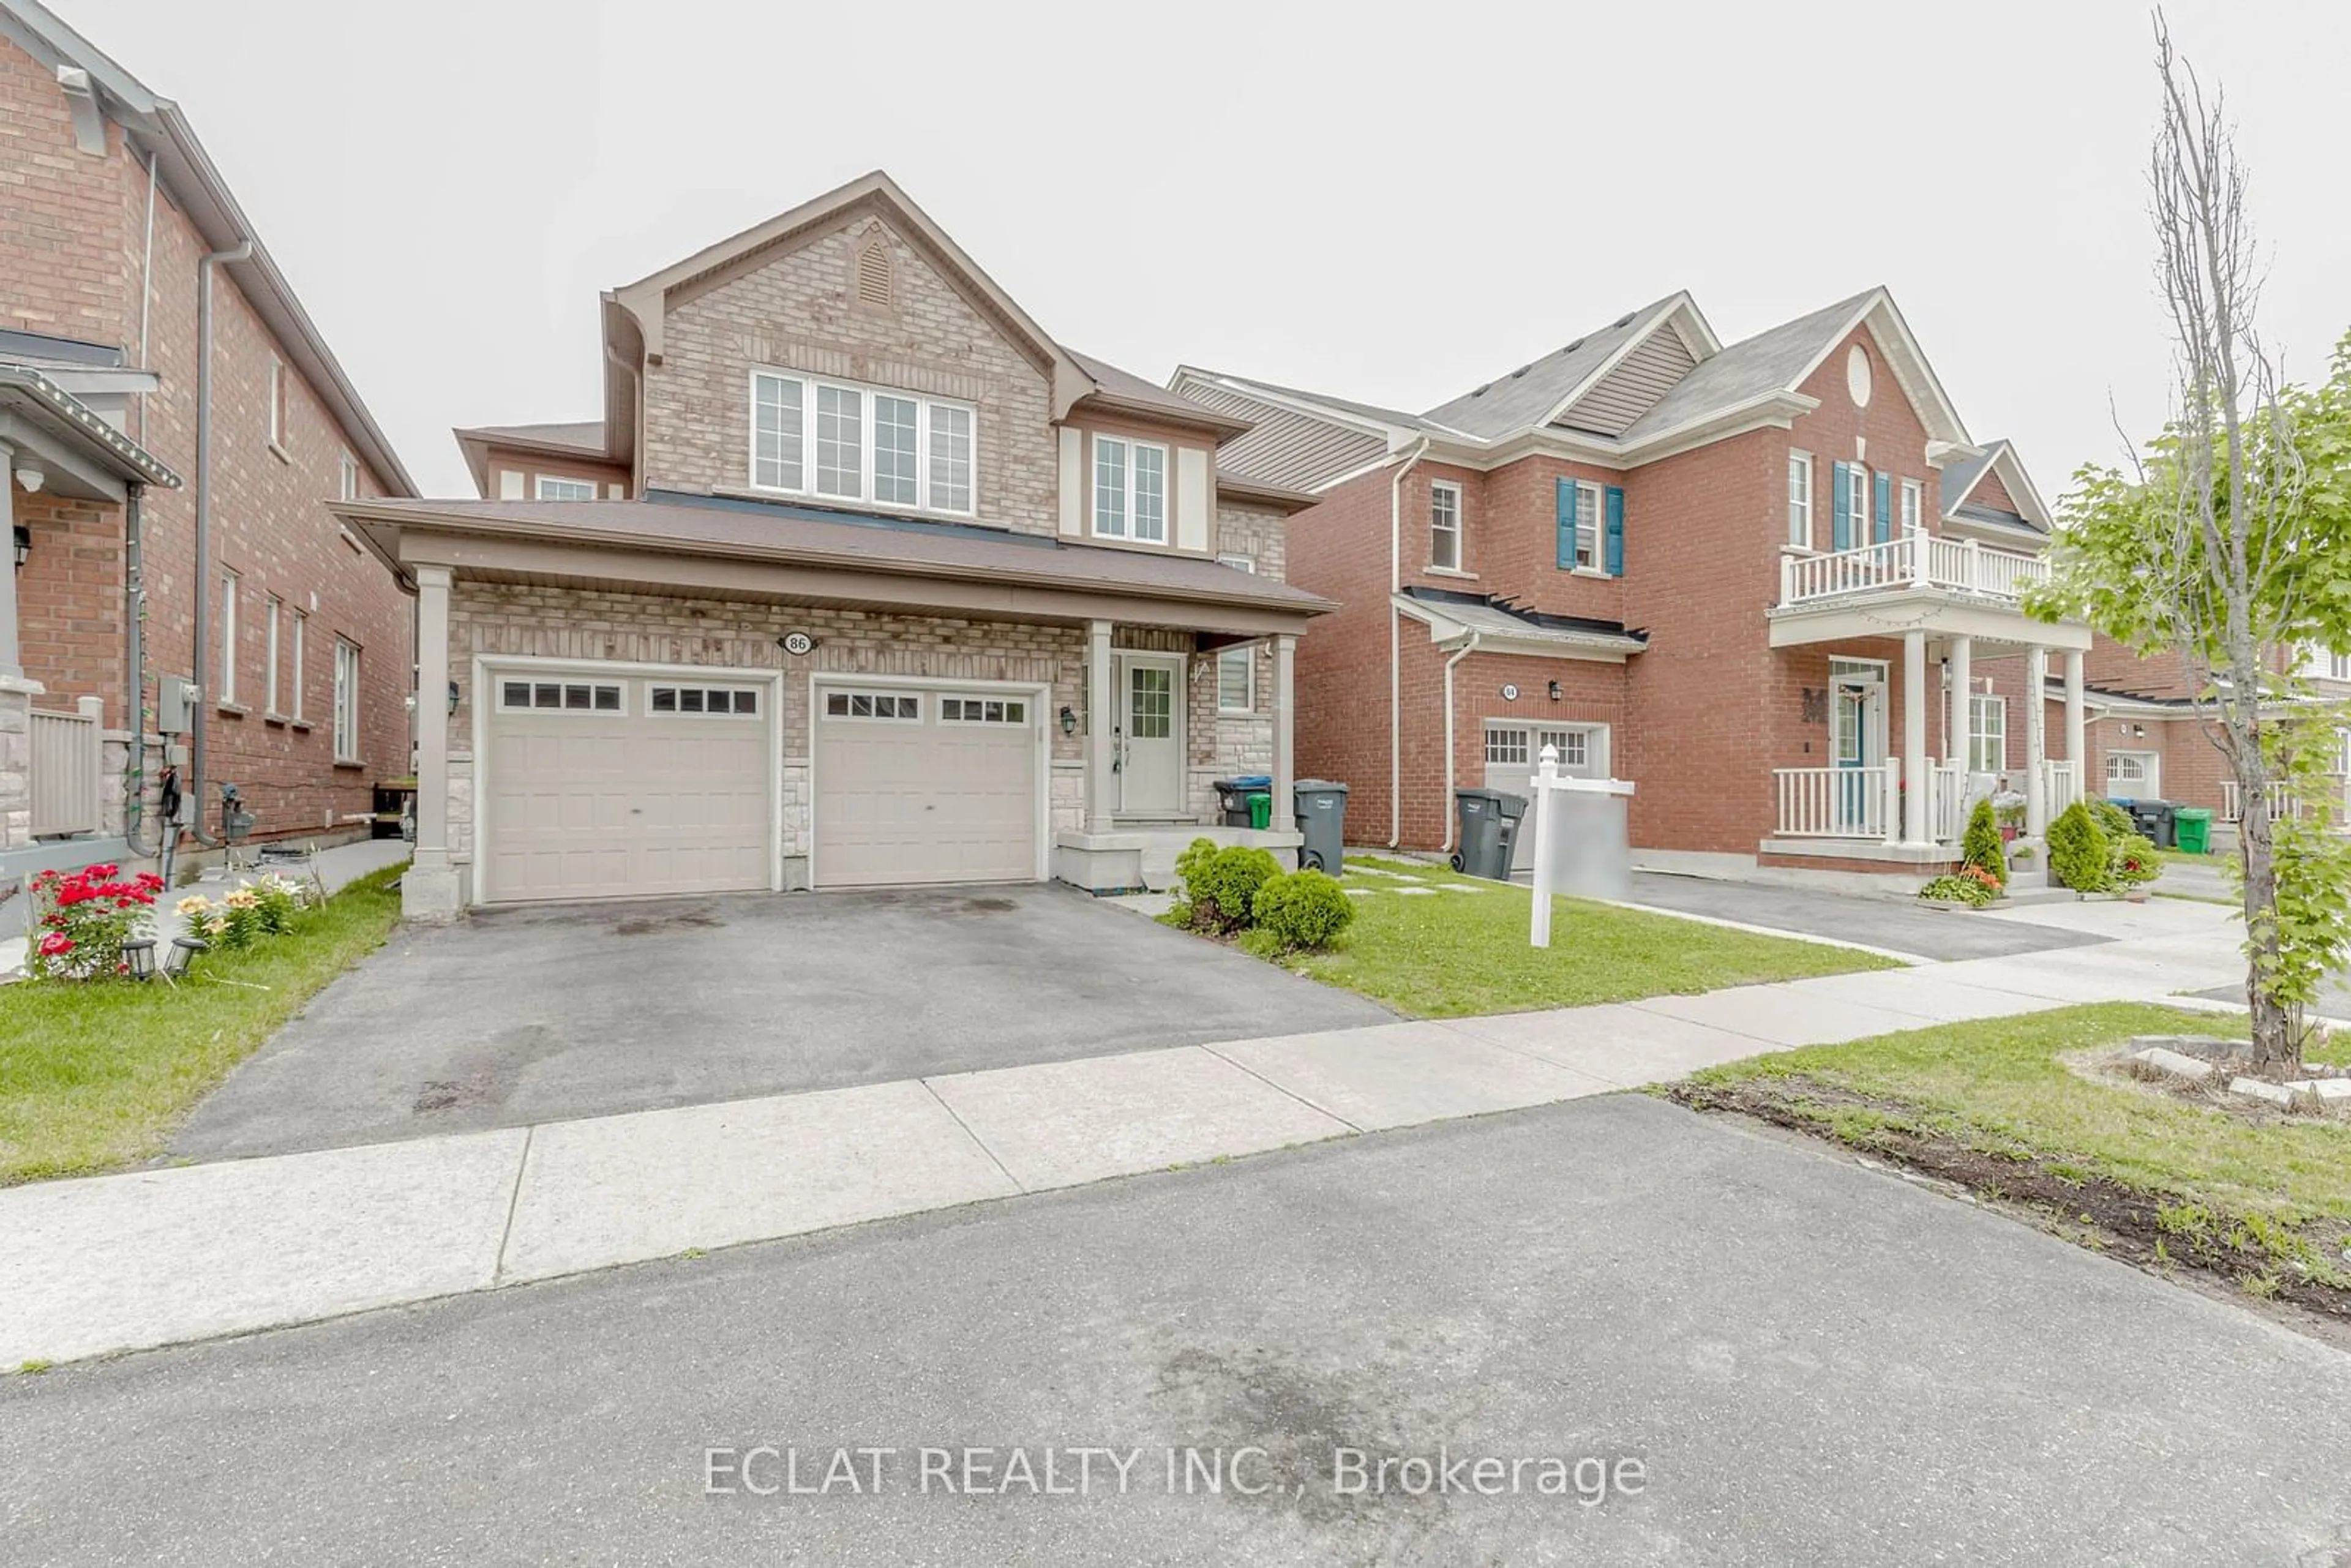 Home with brick exterior material for 86 Enford Cres, Brampton Ontario L7A 4C8